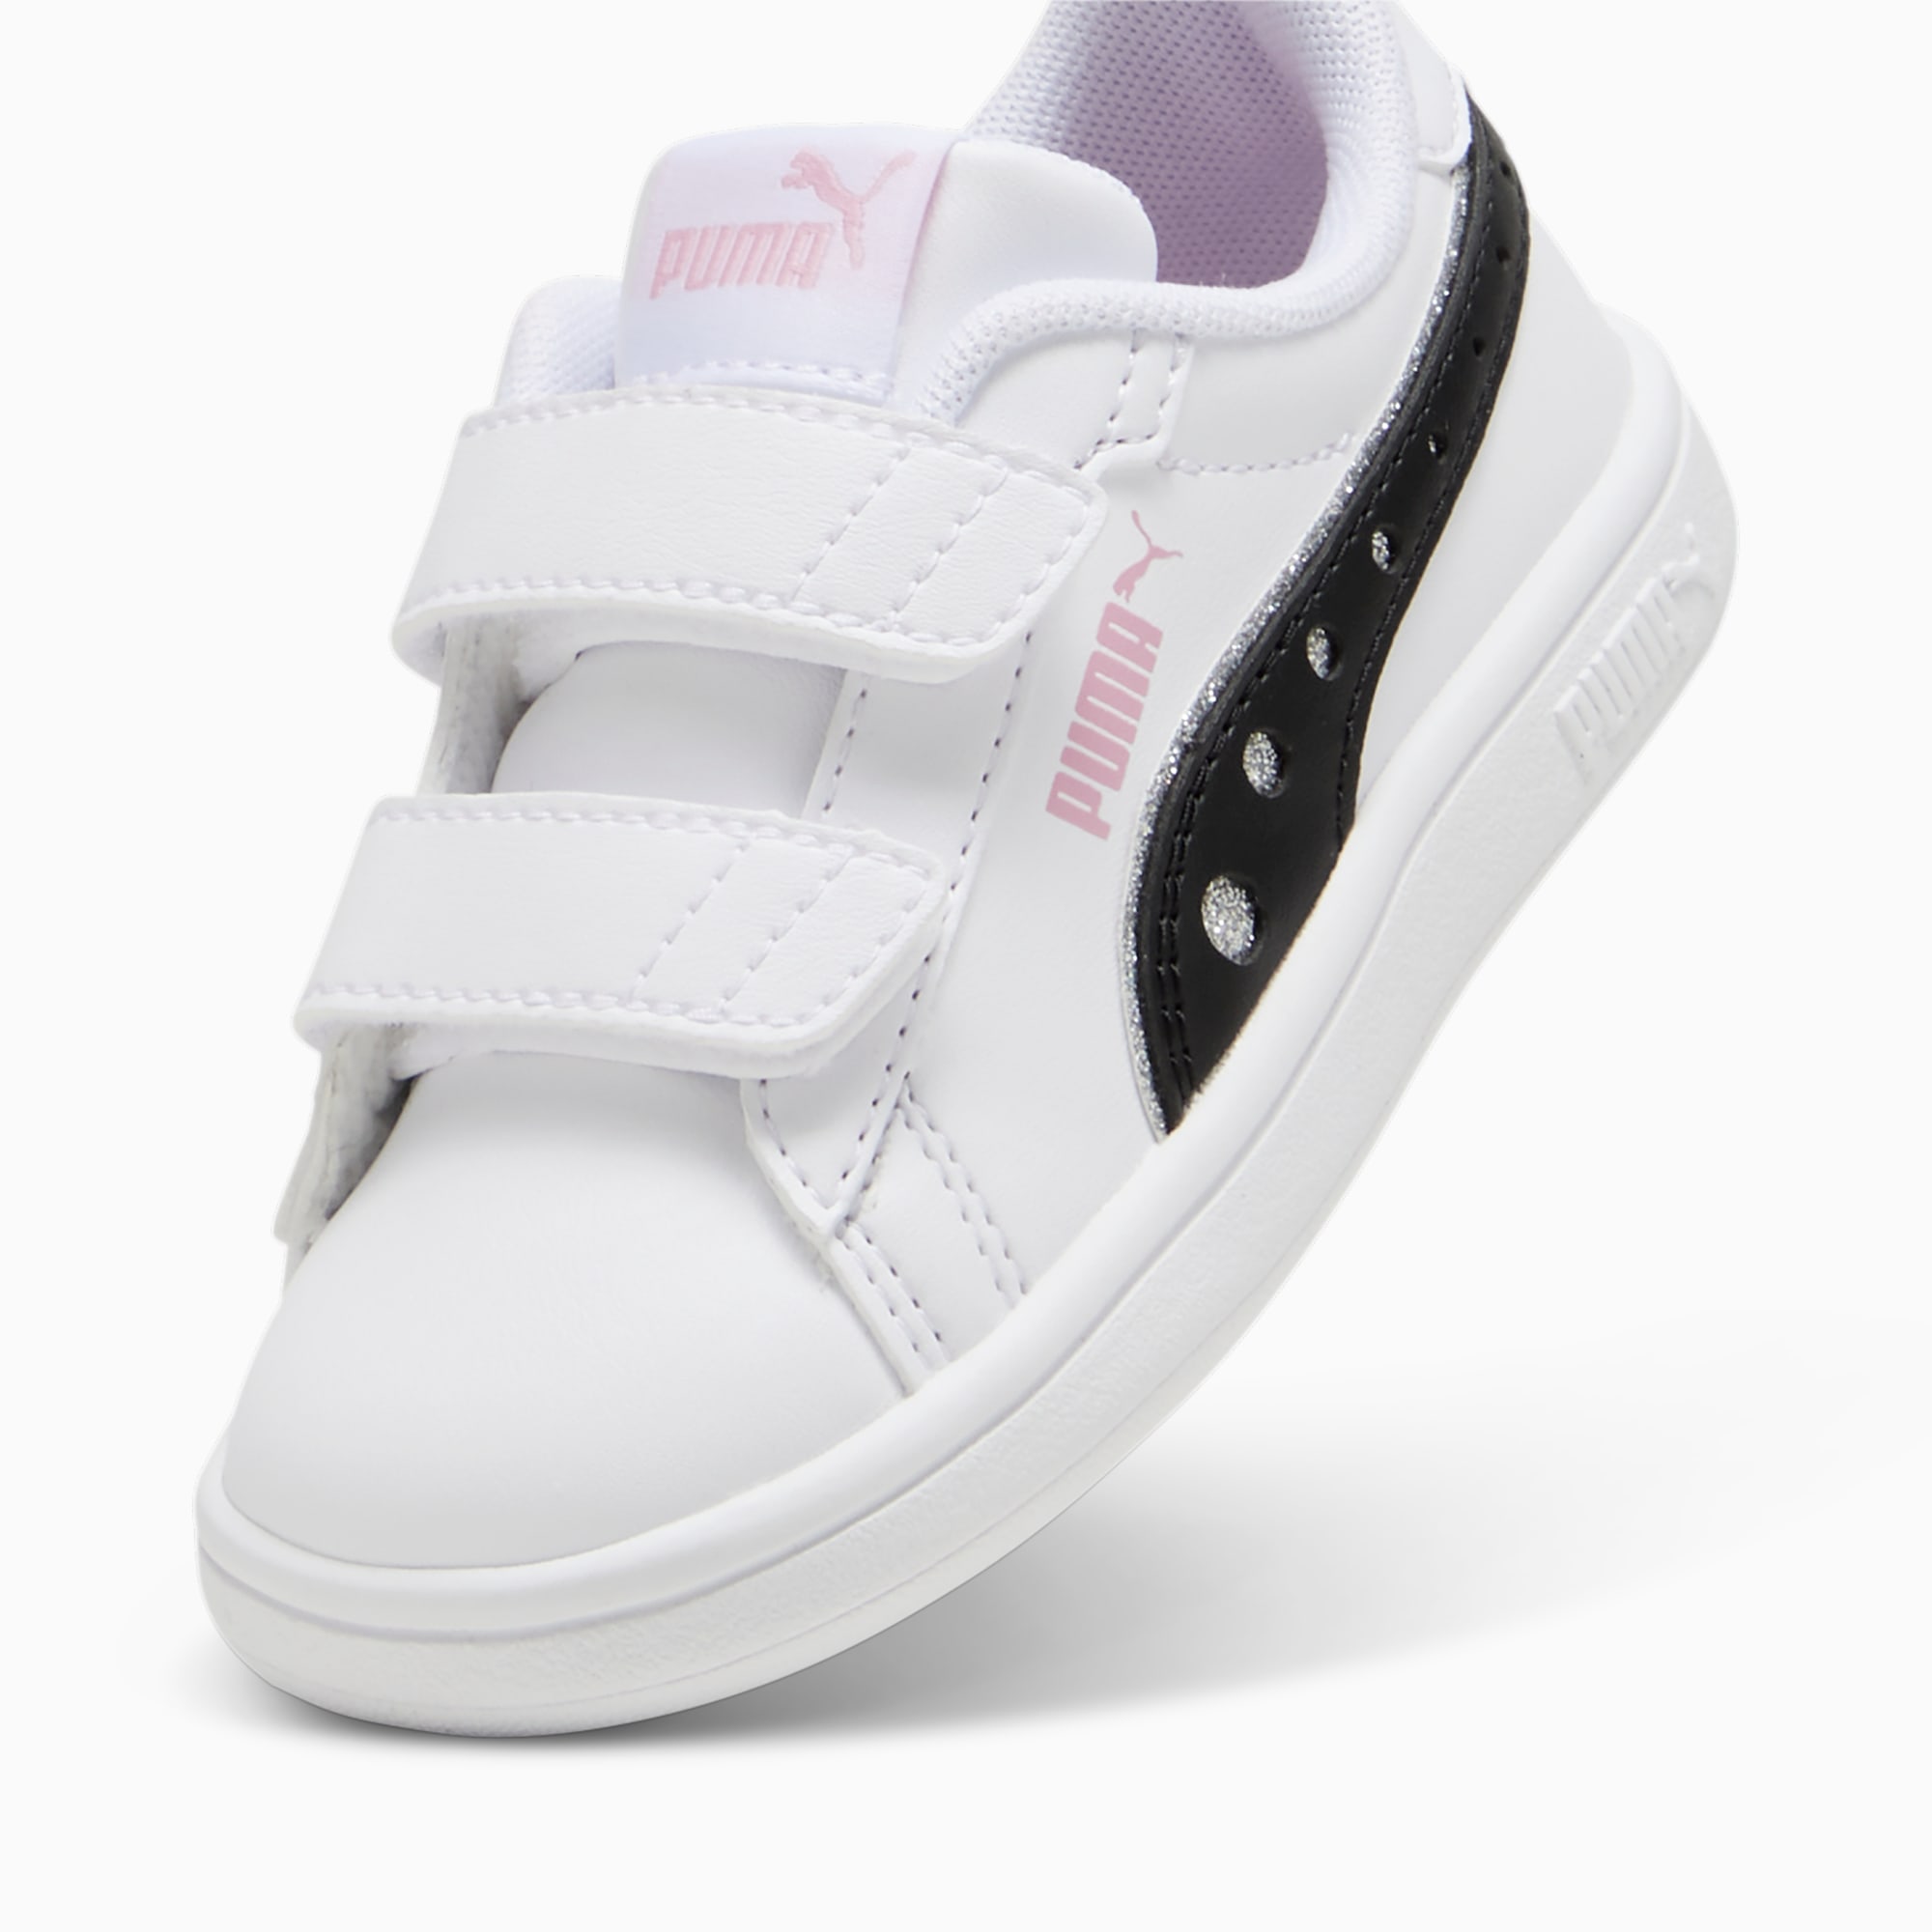 PUMA Smash 3.0 Dance Party Toddlers' Sneakers, White/Black/Pink Lilac, Size 19, Shoes